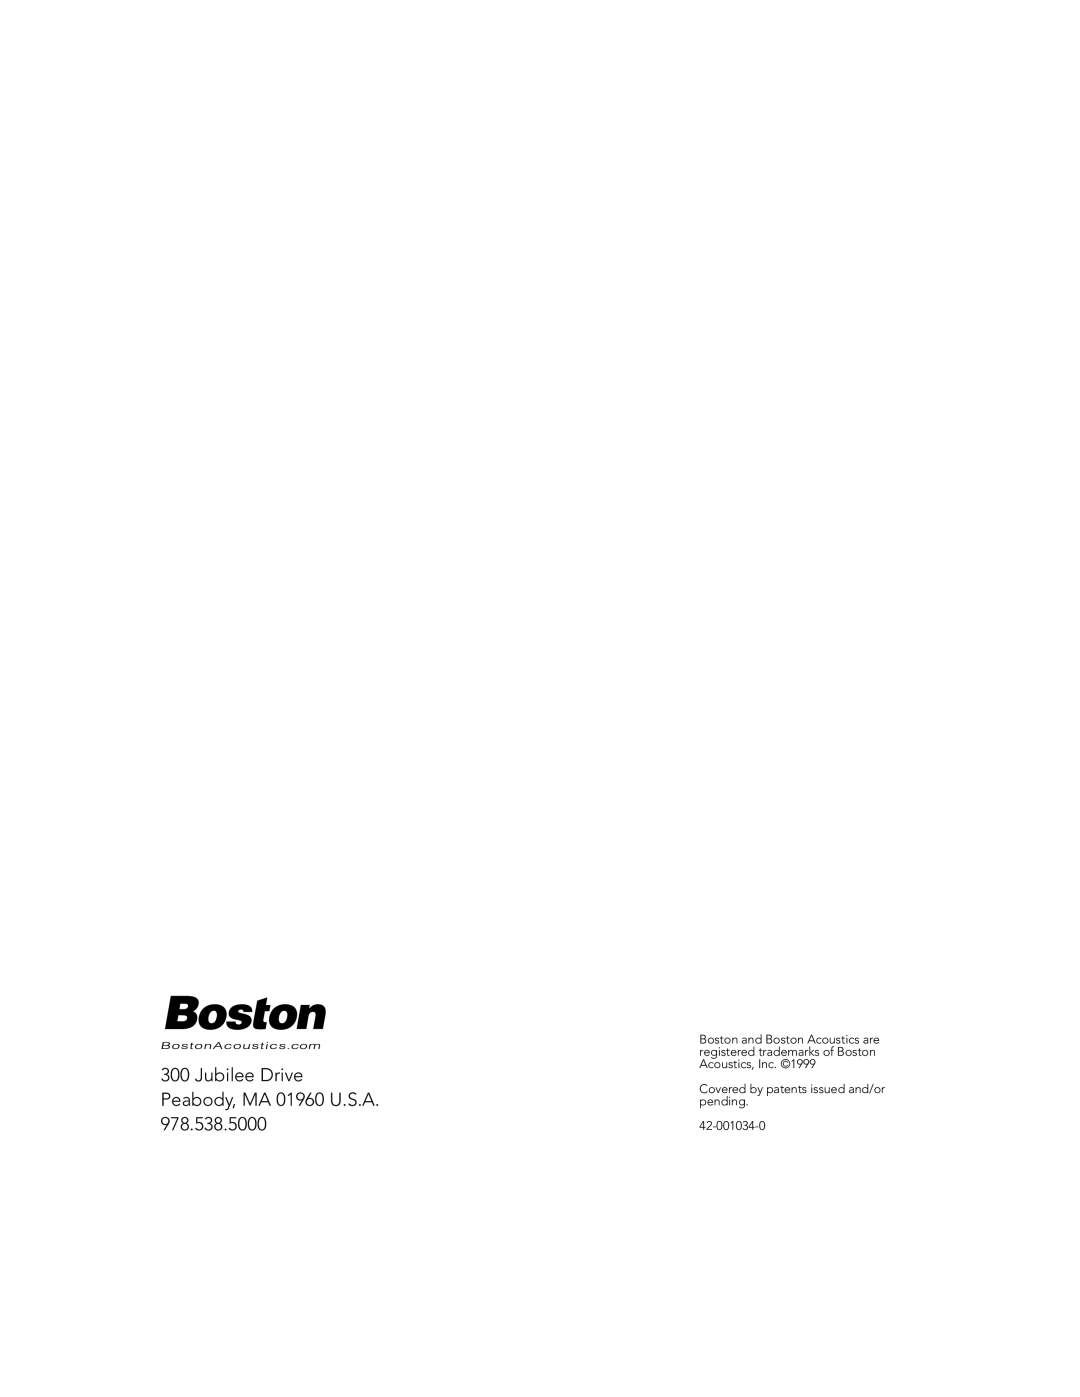 Boston Acoustics GS1000, 800 Jubilee Drive Peabody, MA 01960 U.S.A, Covered by patents issued and/or pending 42-001034-0 